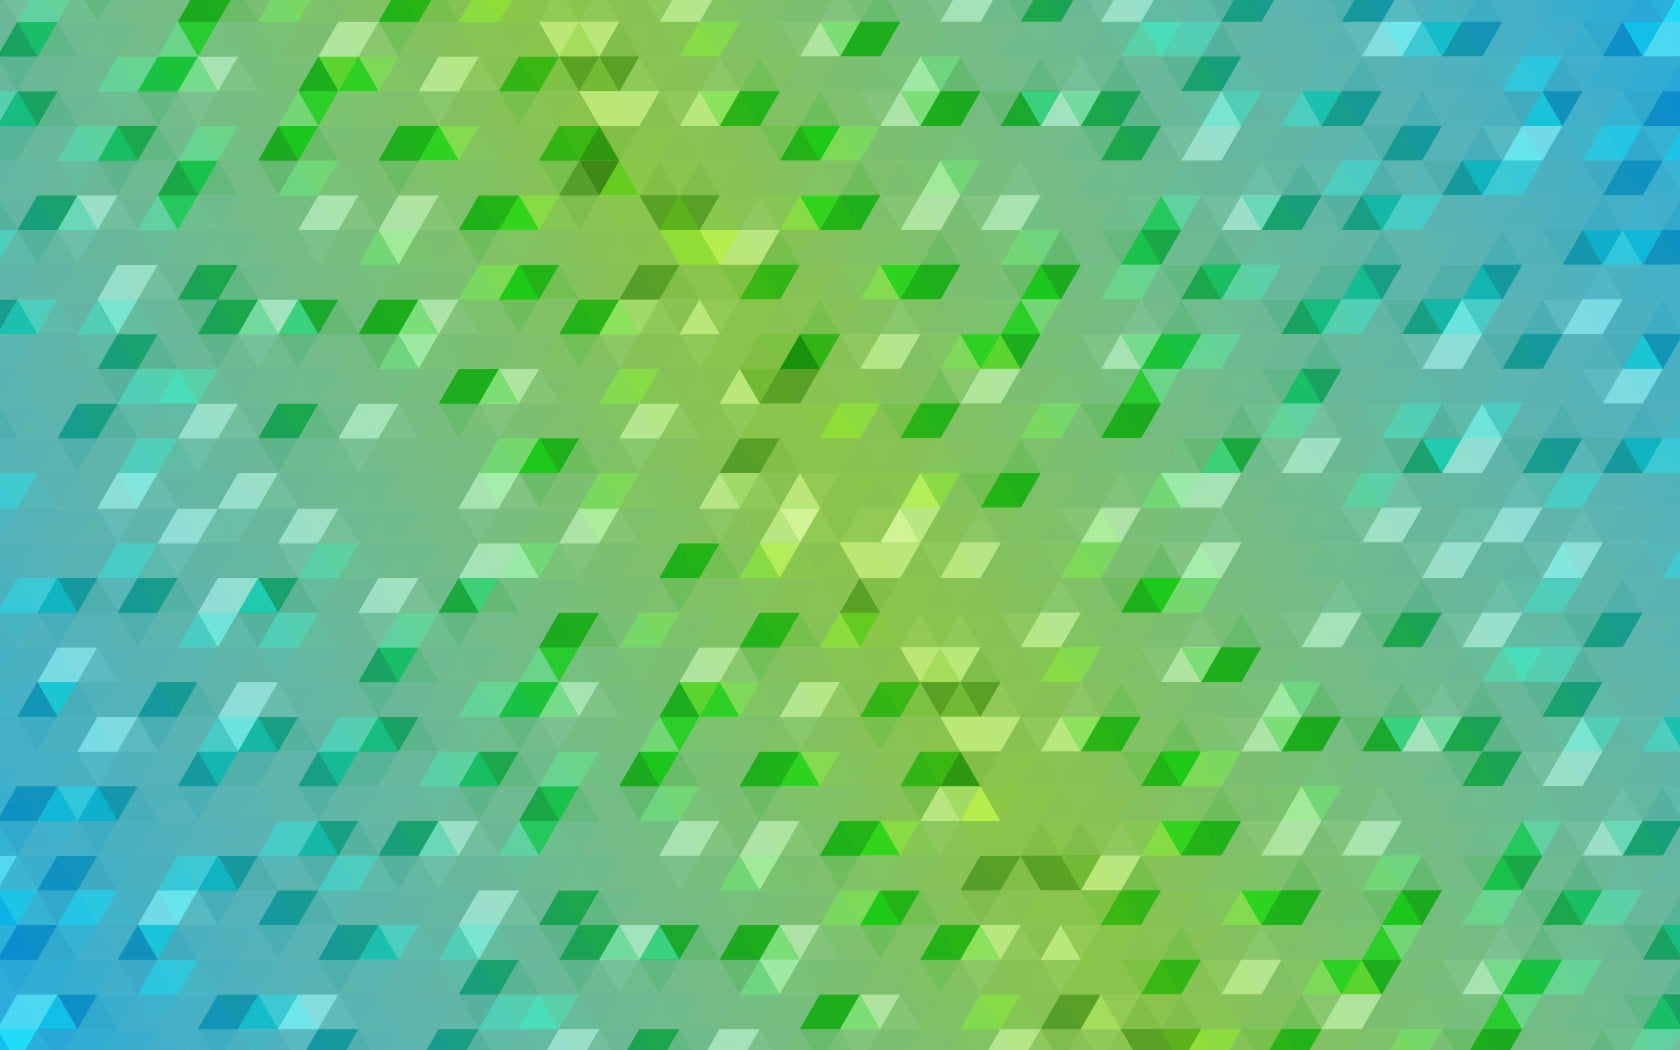 green and teal abstract illustration